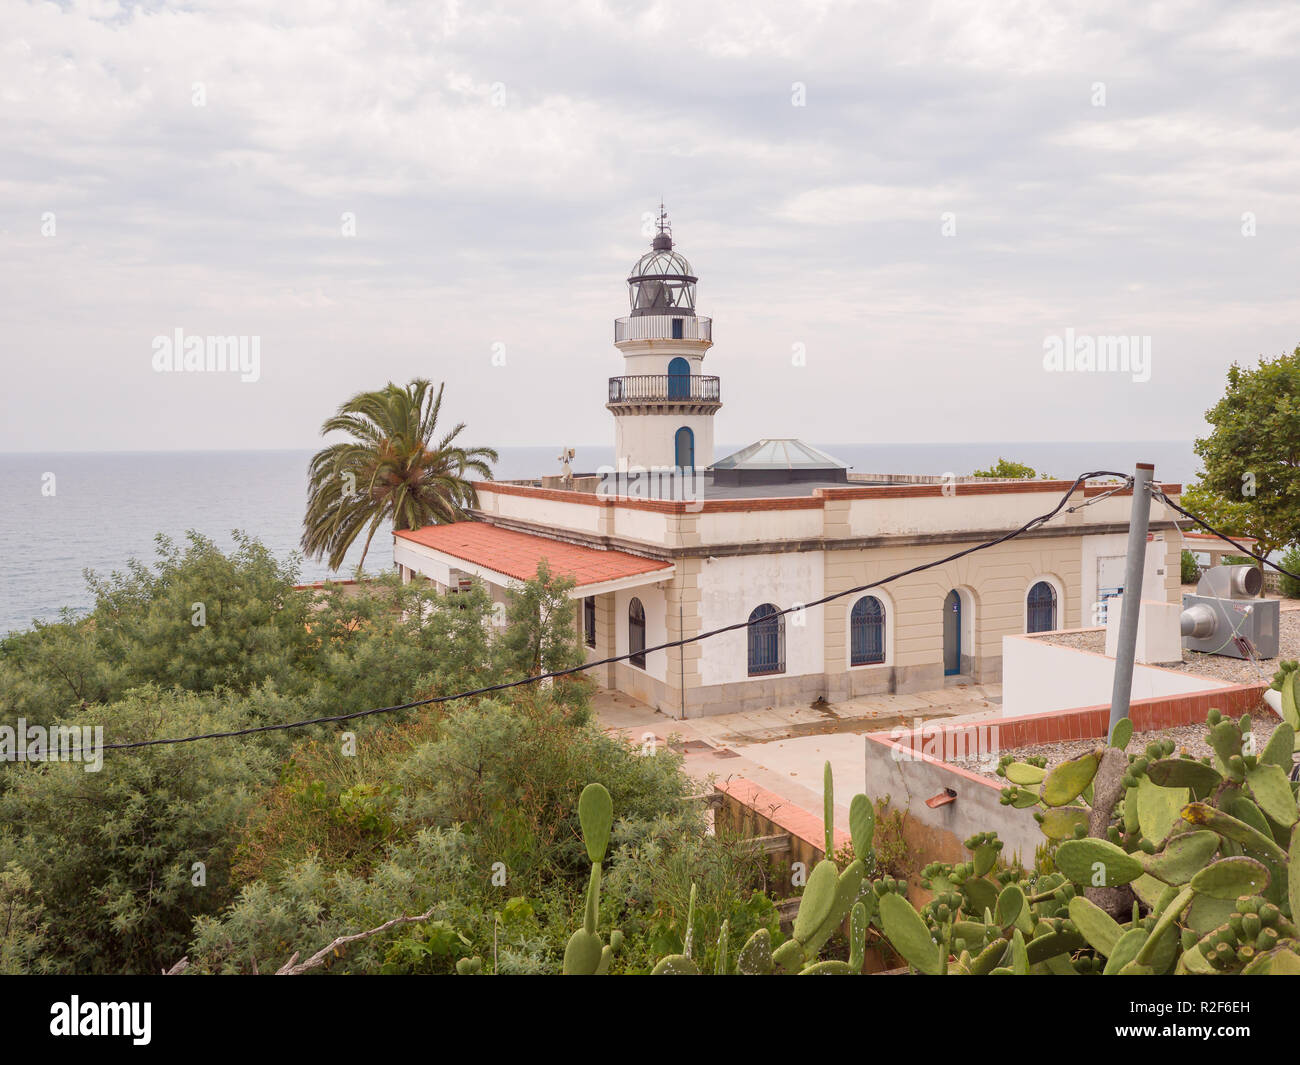 Calella Lighthouse is active lighthouse situated in coastal town of Calella in Costa del Maresme, Catalonia, Spain Stock Photo